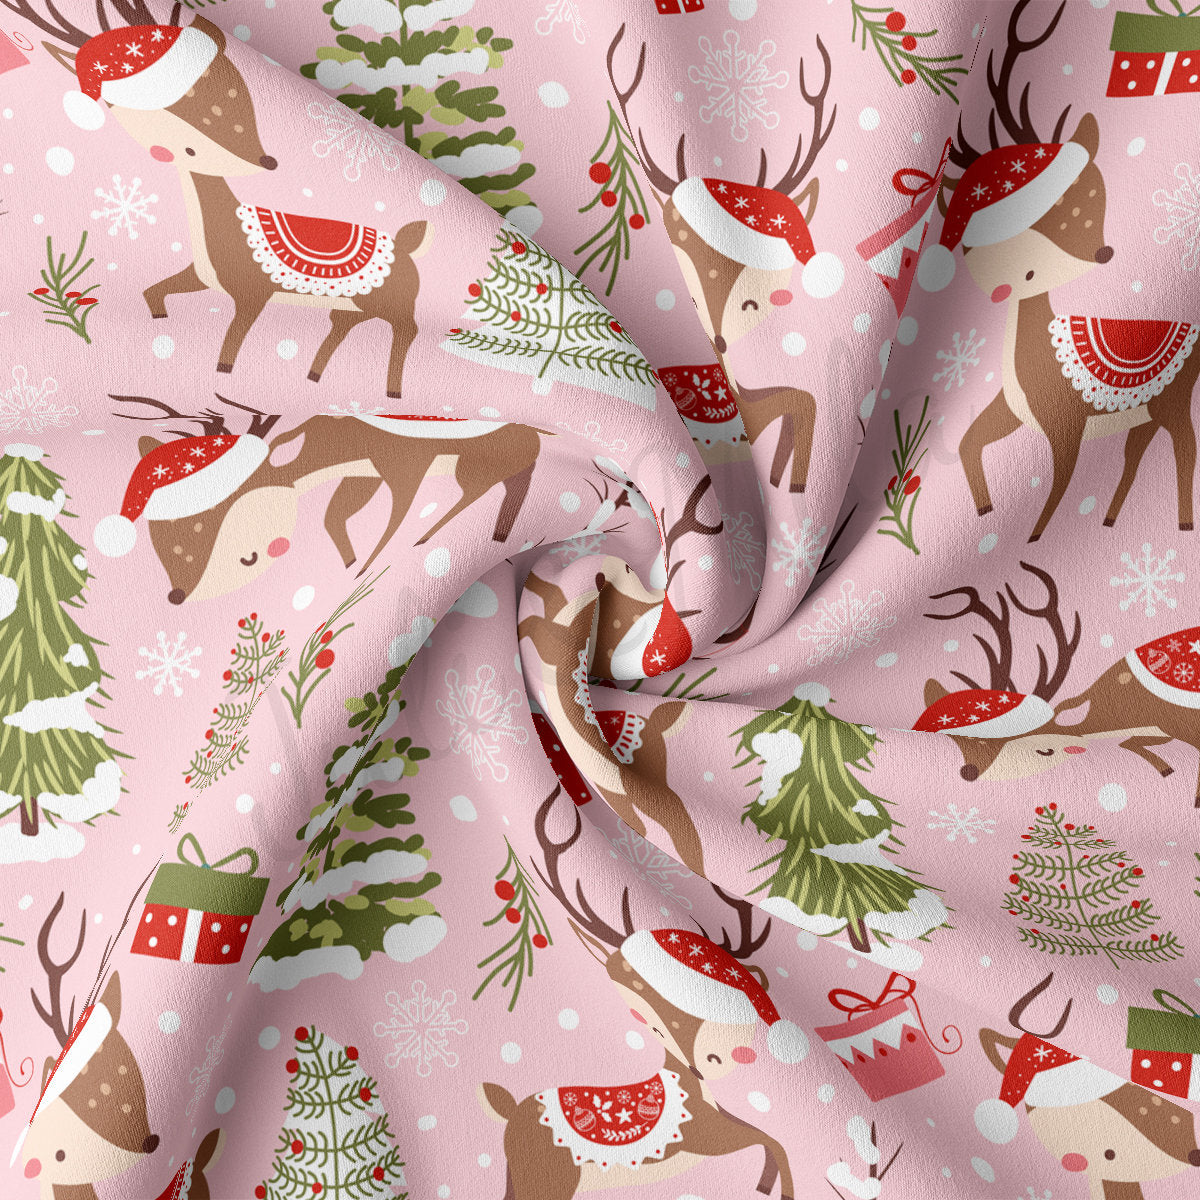 Christmas DBP Fabric Double Brushed Polyester Fabric by the Yard DBP Jersey Stretchy Soft Polyester Stretch Fabric DBP2182